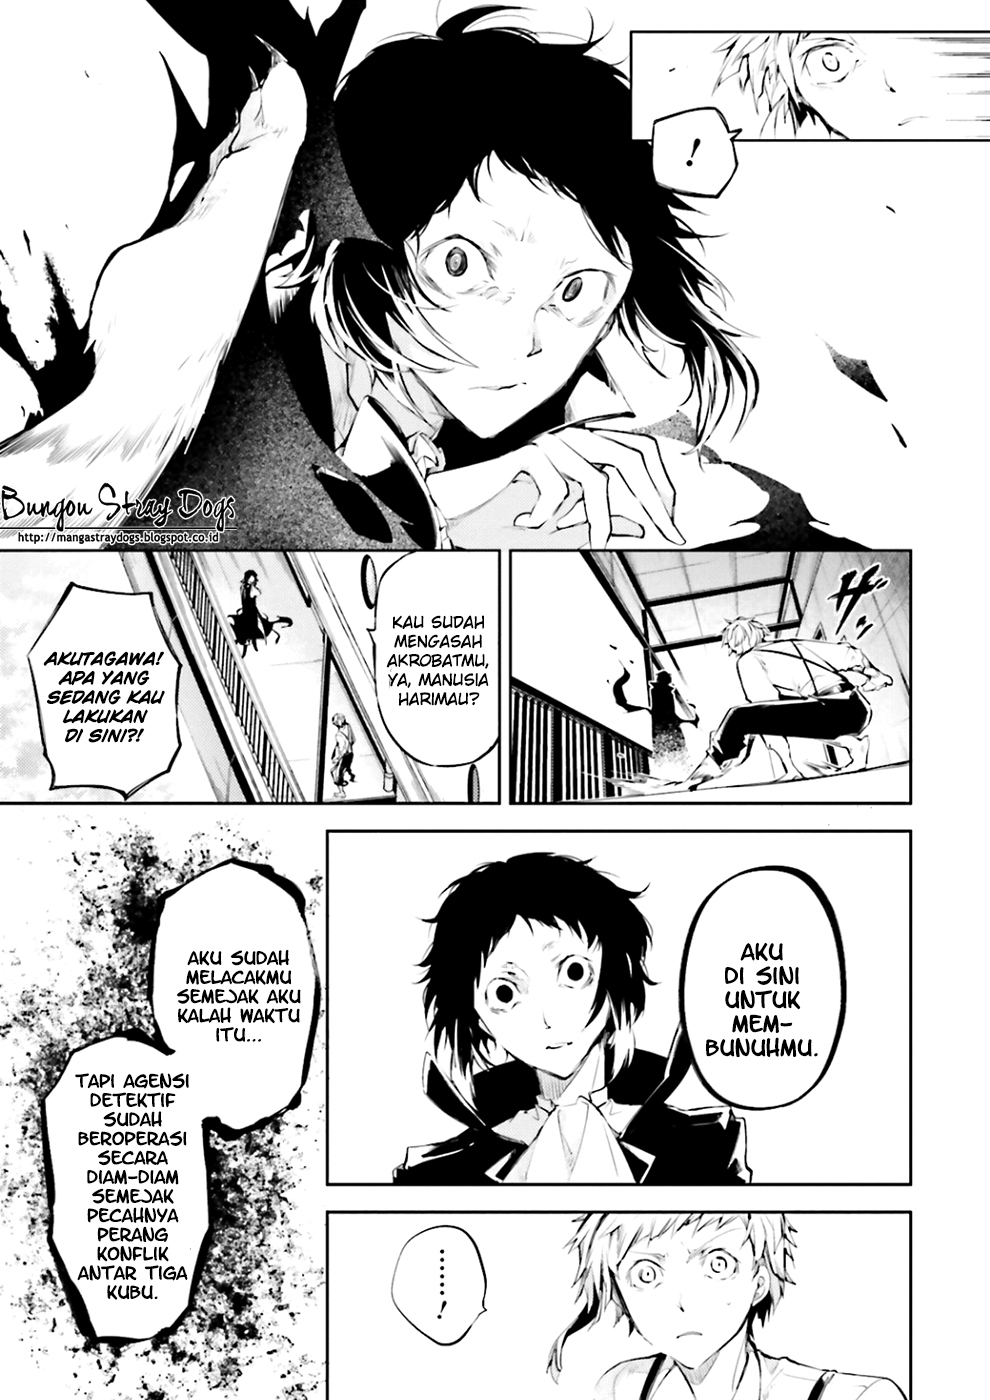 Bungou Stray Dogs Chapter 34